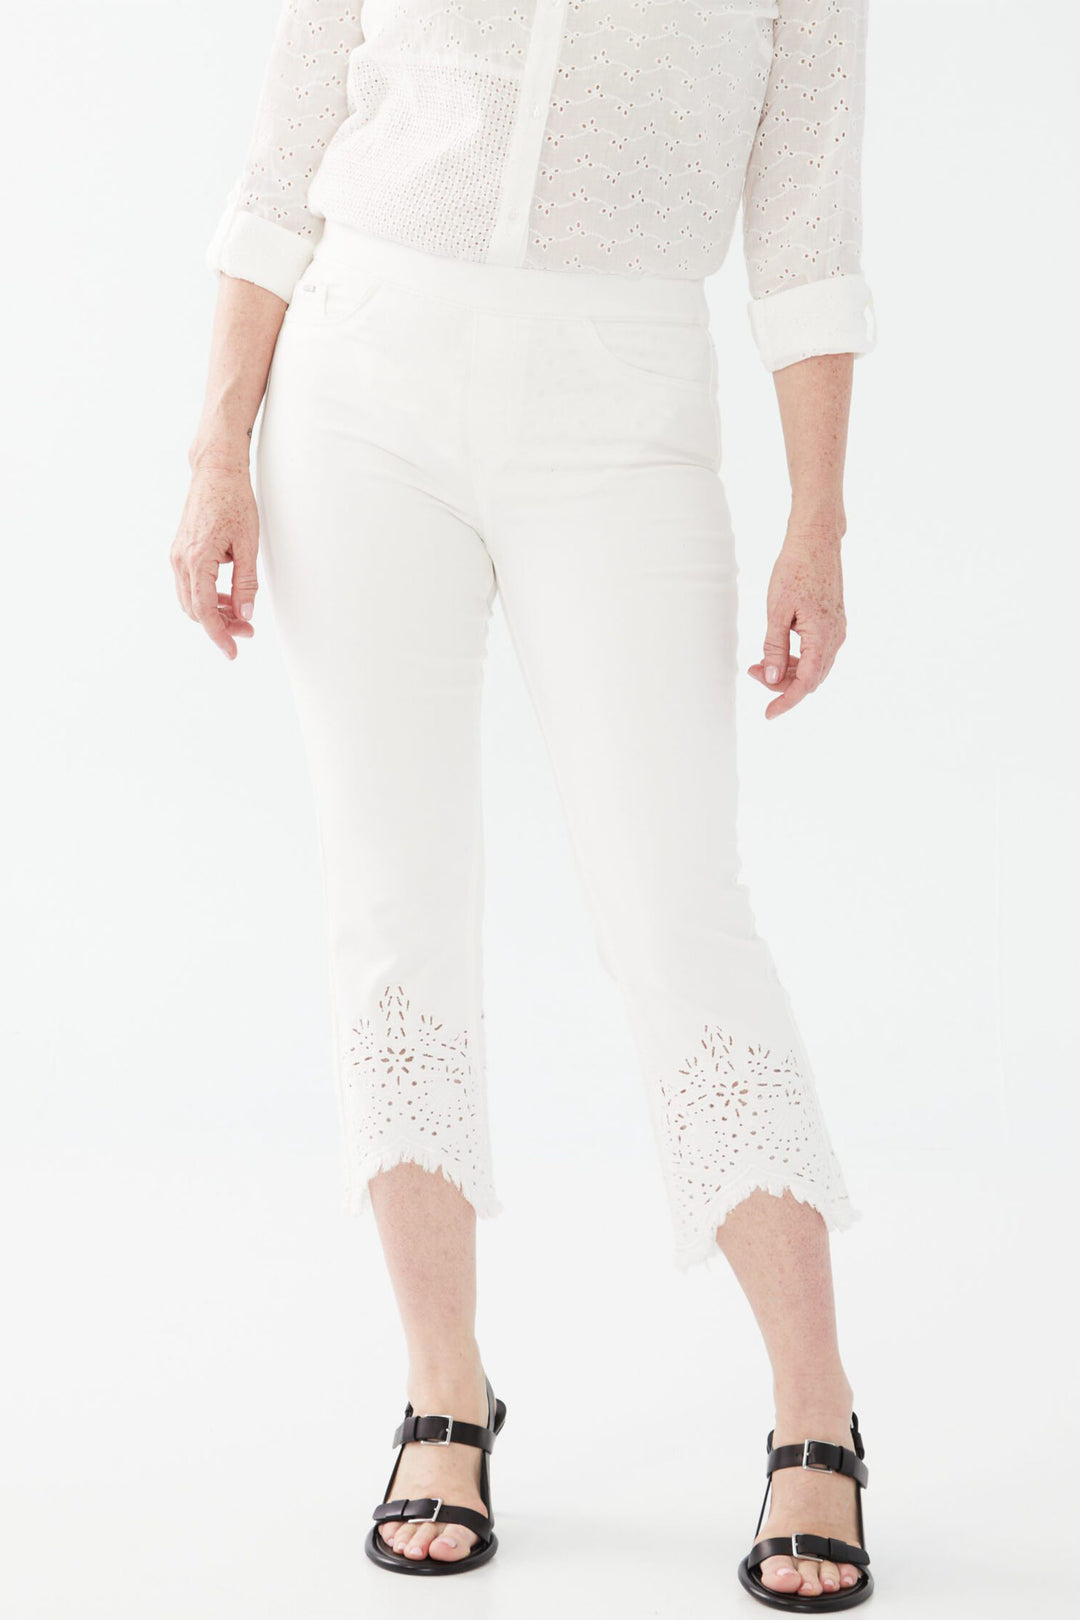 FDJ Spring 2024 This capri length pant features a mid-rise fit and high stretch fabric for maximum comfort. 